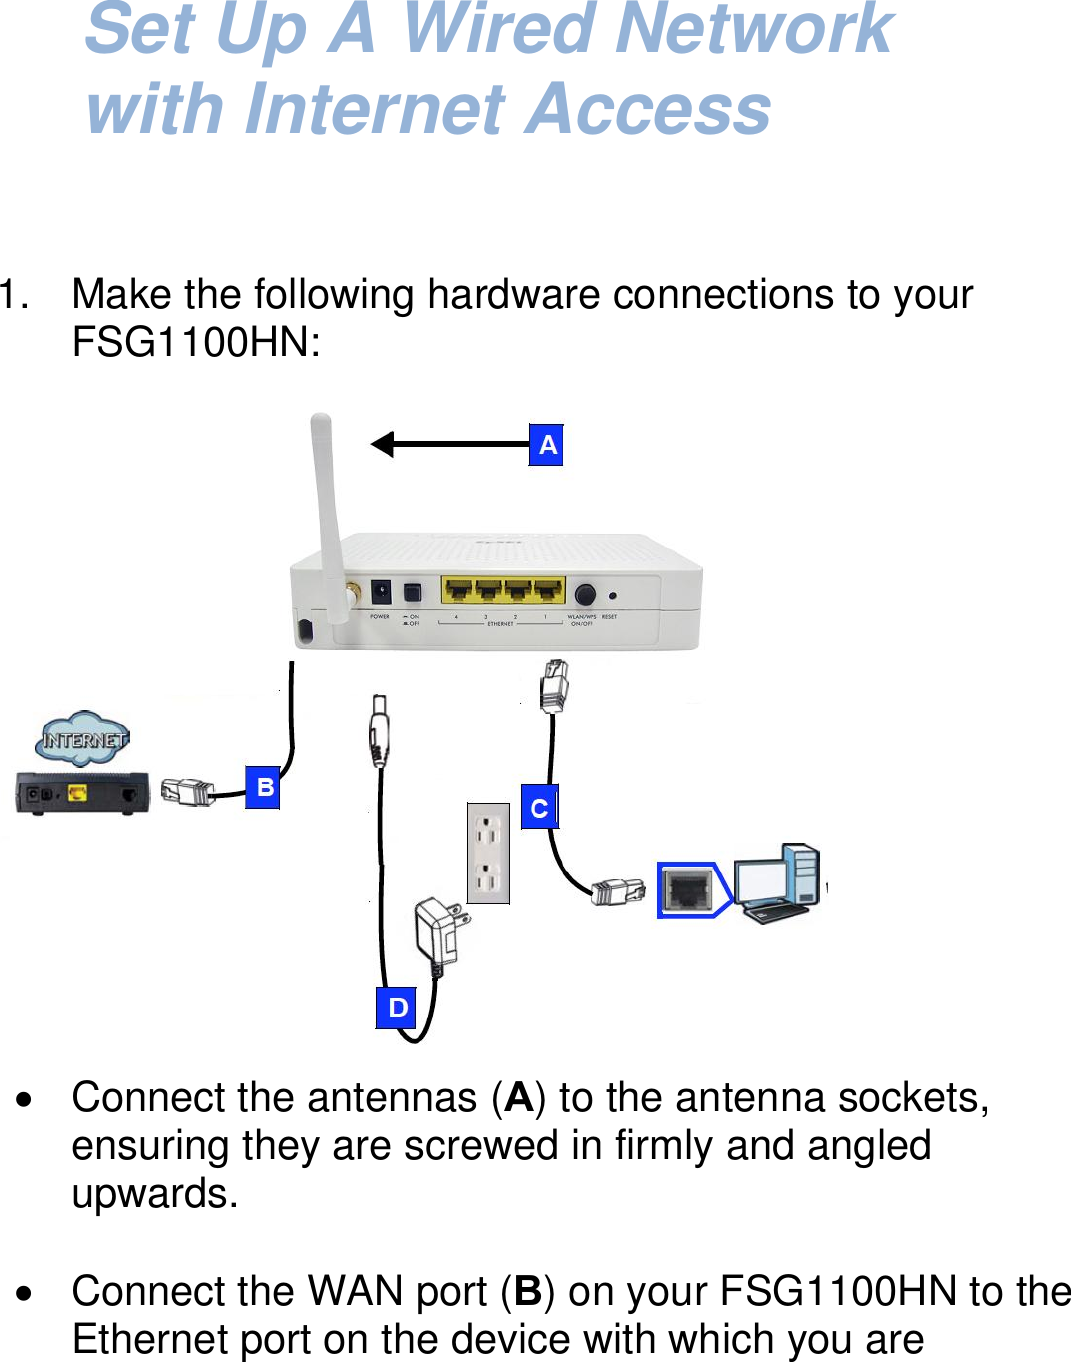   Set Up A Wired Network with Internet Access     1.  Make the following hardware connections to your FSG1100HN:      Connect the antennas (A) to the antenna sockets, ensuring they are screwed in firmly and angled upwards.    Connect the WAN port (B) on your FSG1100HN to the Ethernet port on the device with which you are 